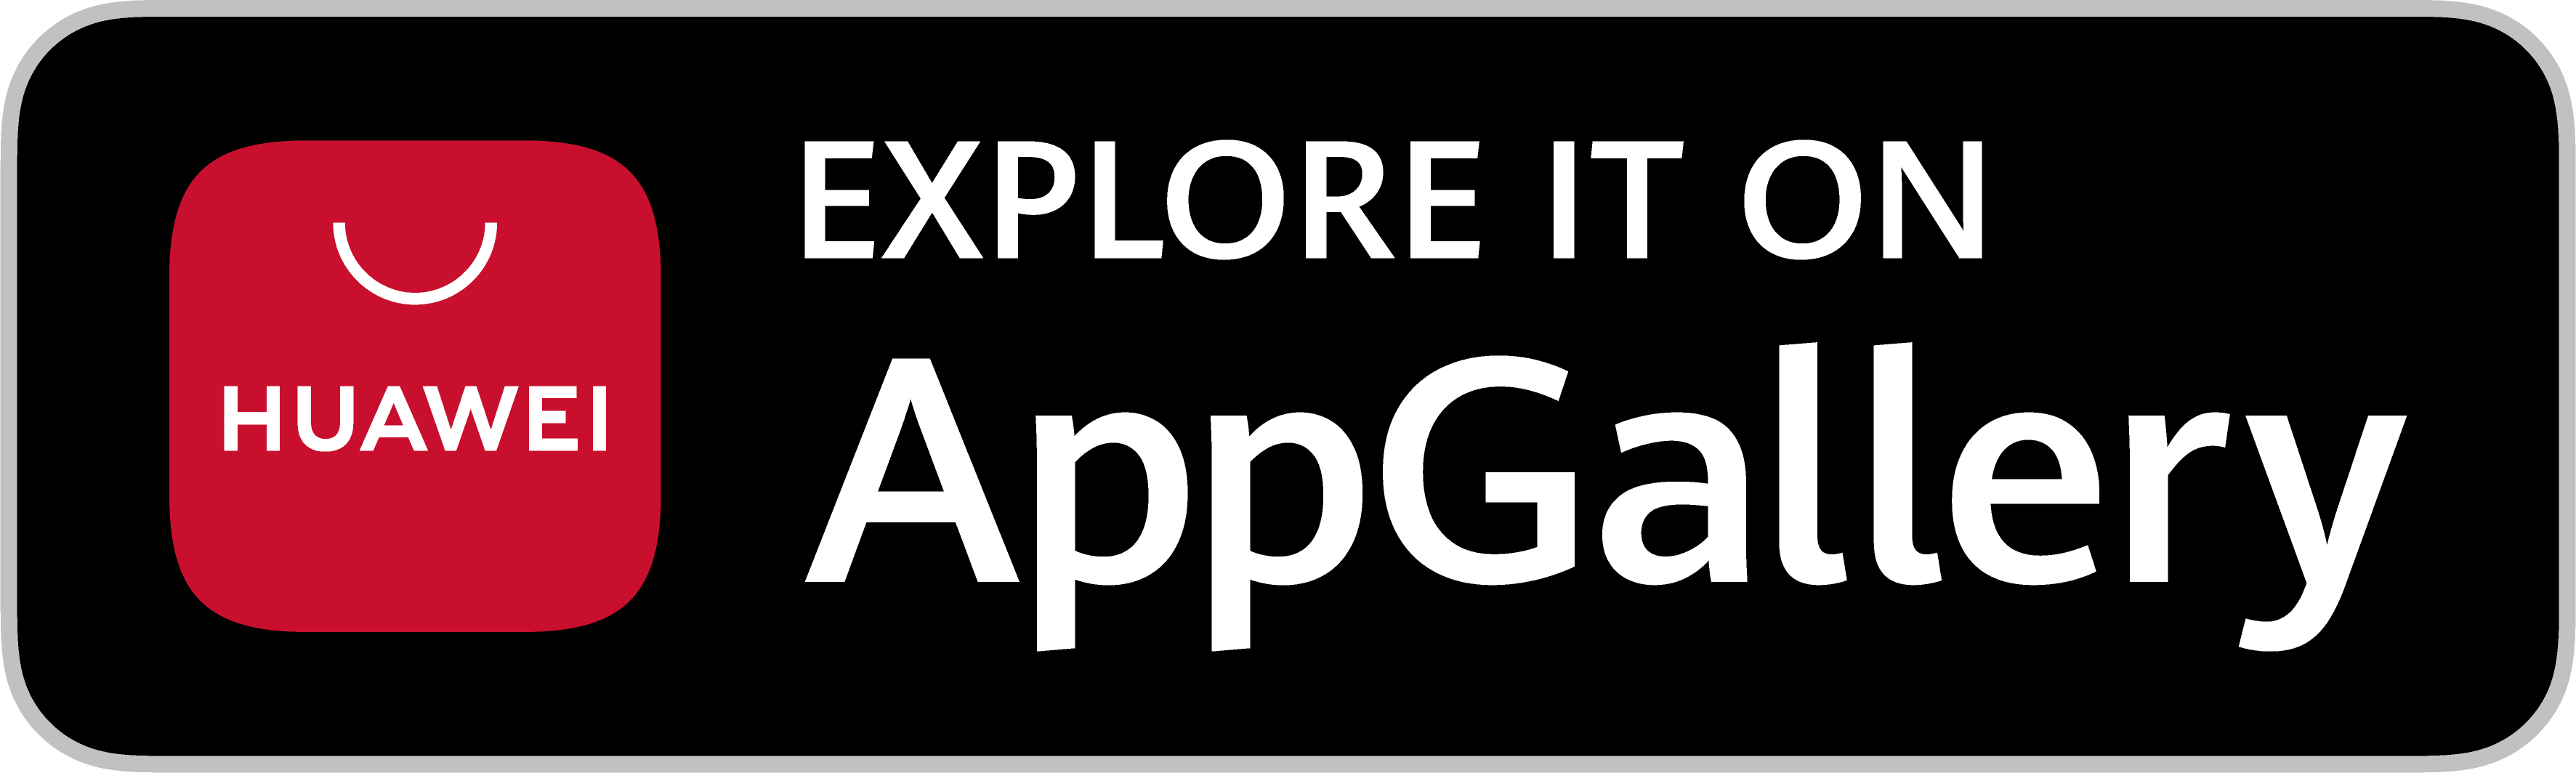 SBCApp - Huawei AppGallery